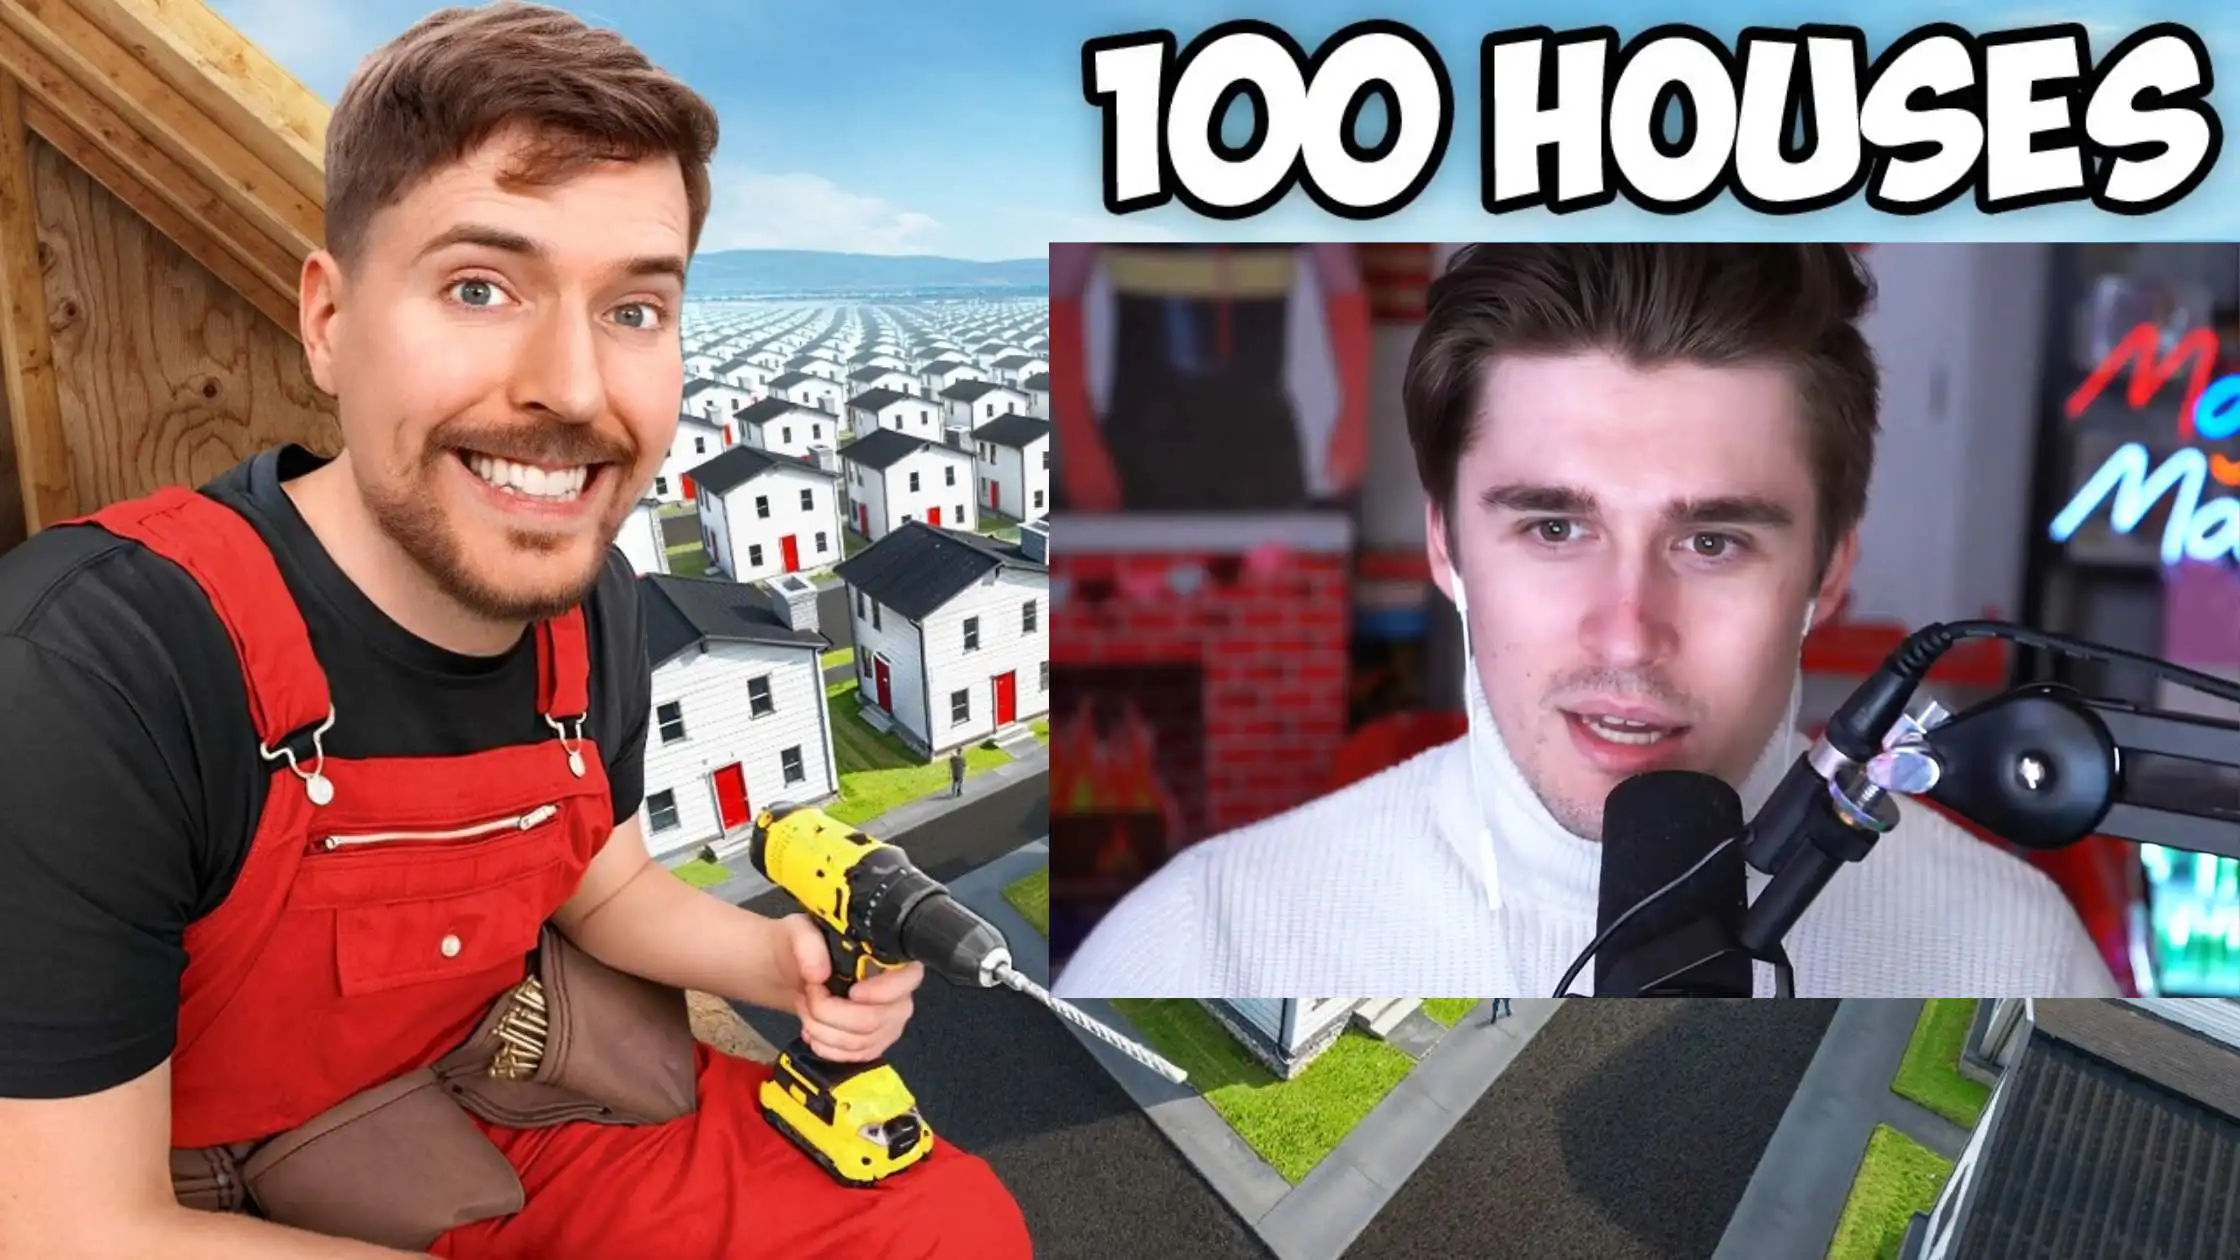 MrBeast Builds 100 Homes and Gives Them Away: A Bold Act of Generosity or Wasteful Extravagance?